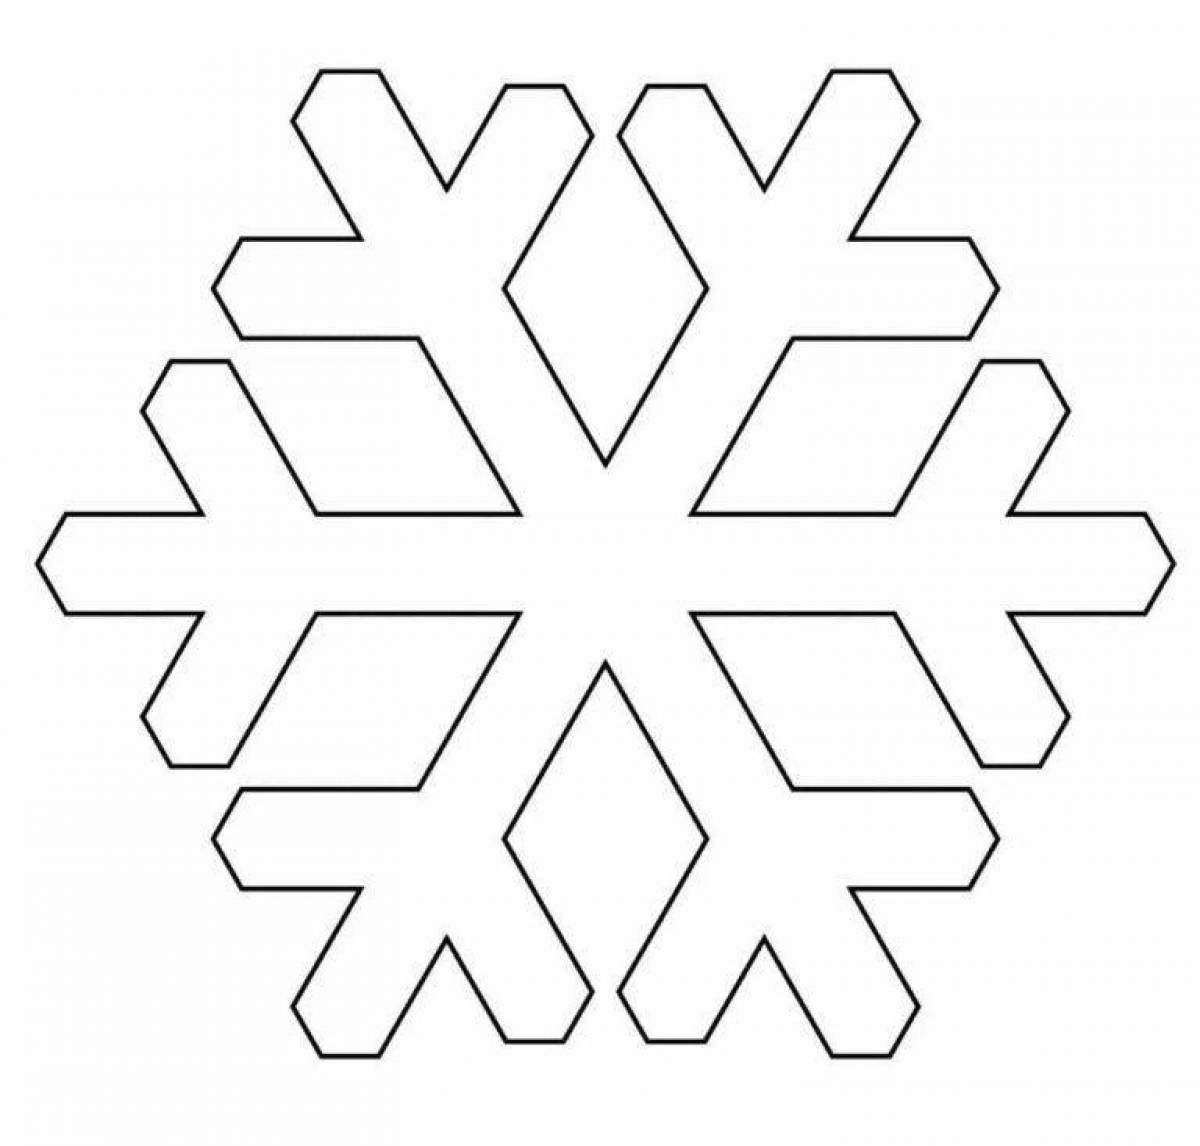 Magic snowflake coloring page for kids